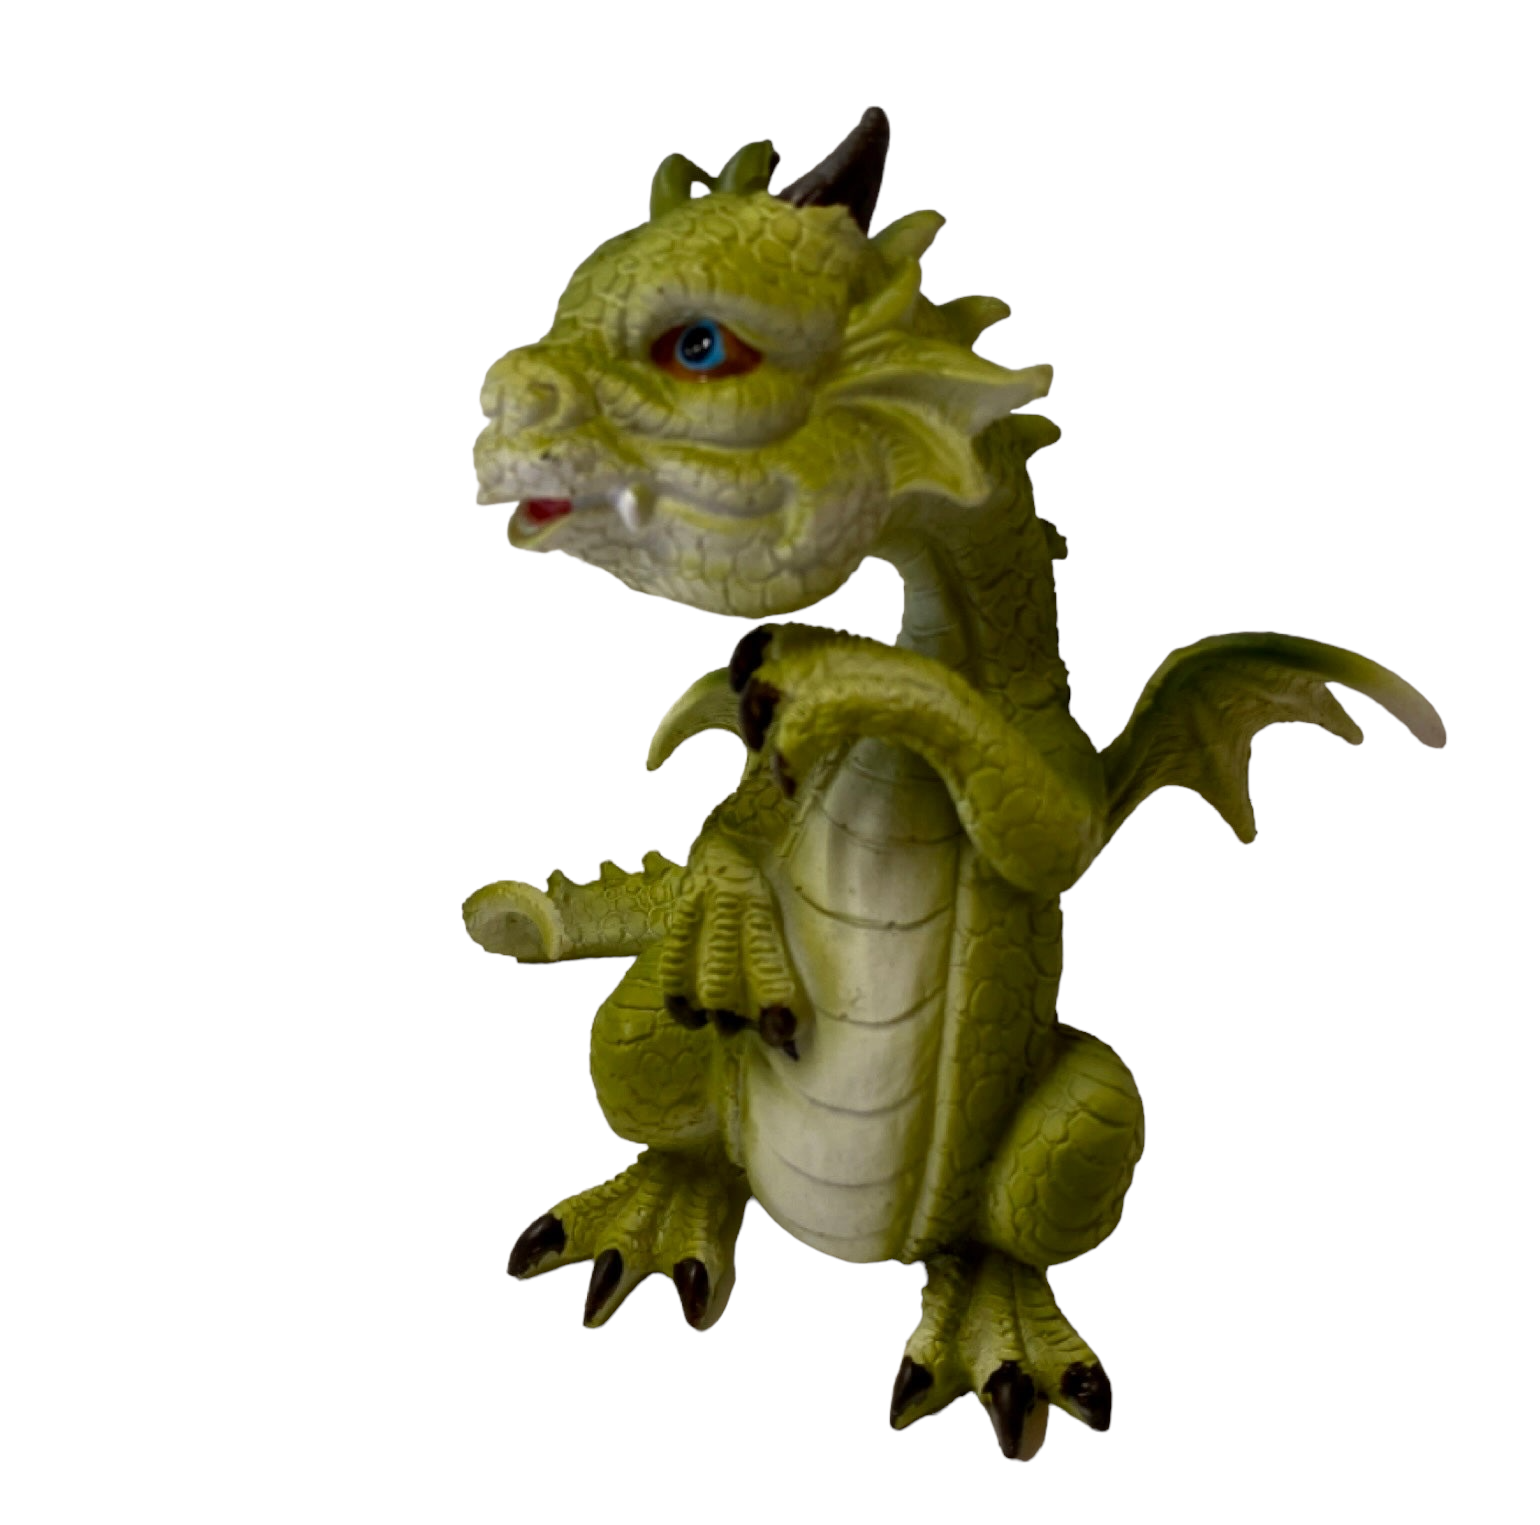 Dragon Cheeky Waving Ornament - The Renmy Store Homewares & Gifts 